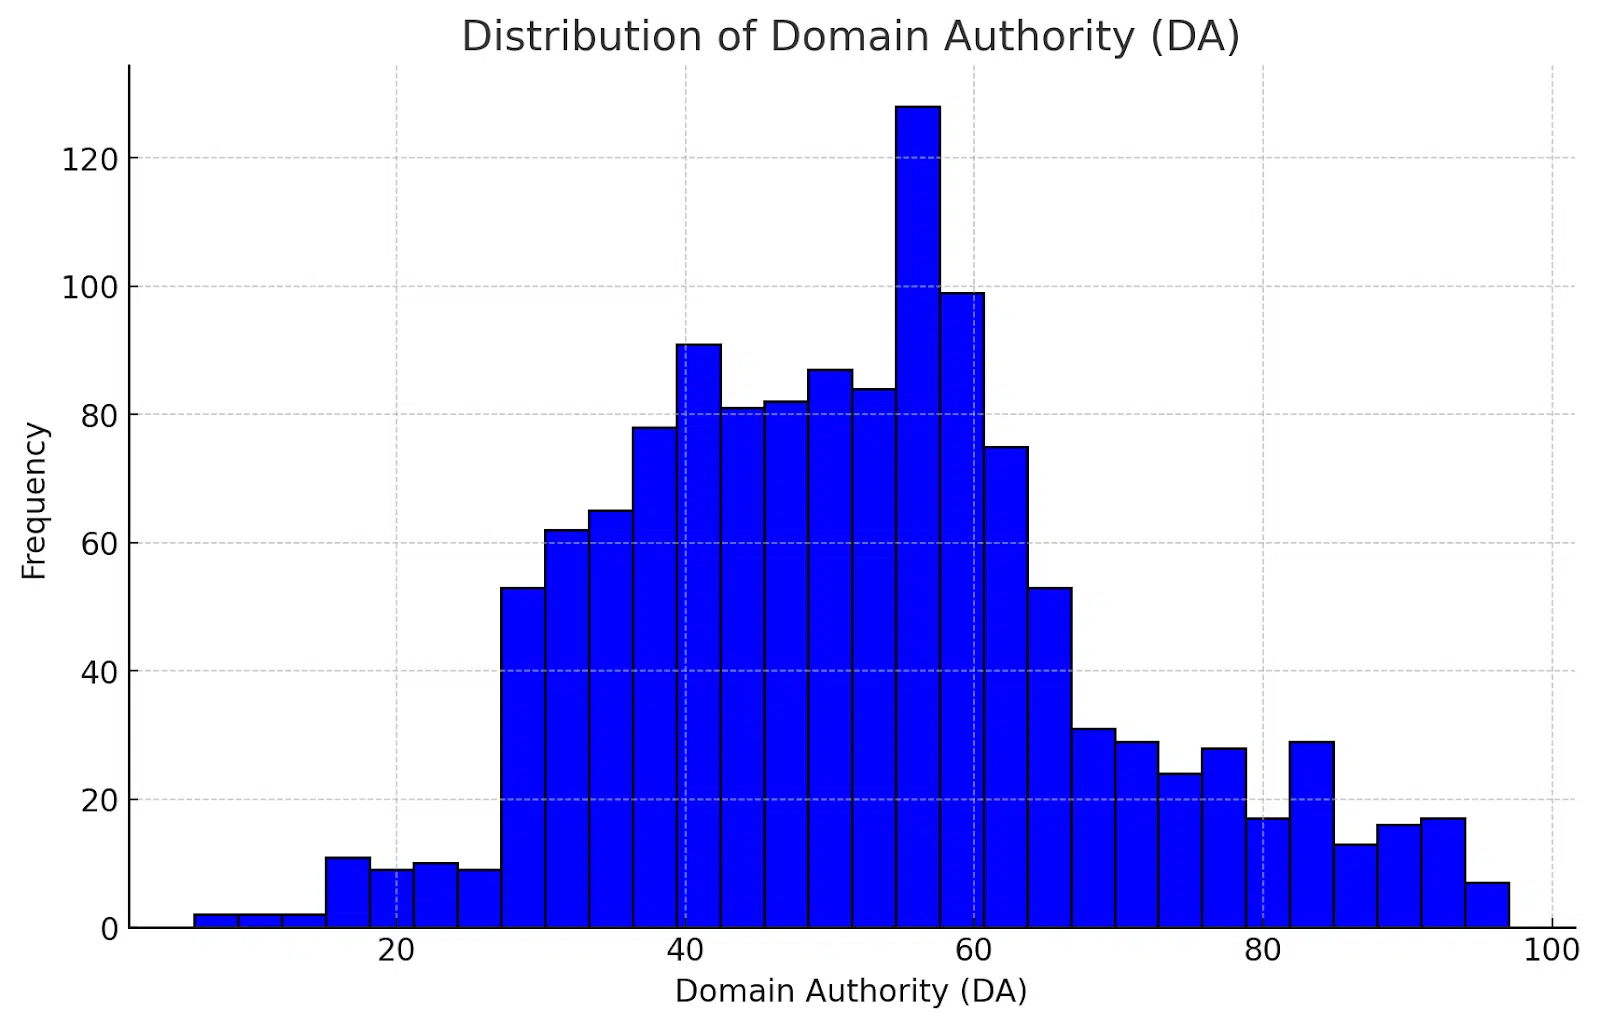 Distribution of domain authority